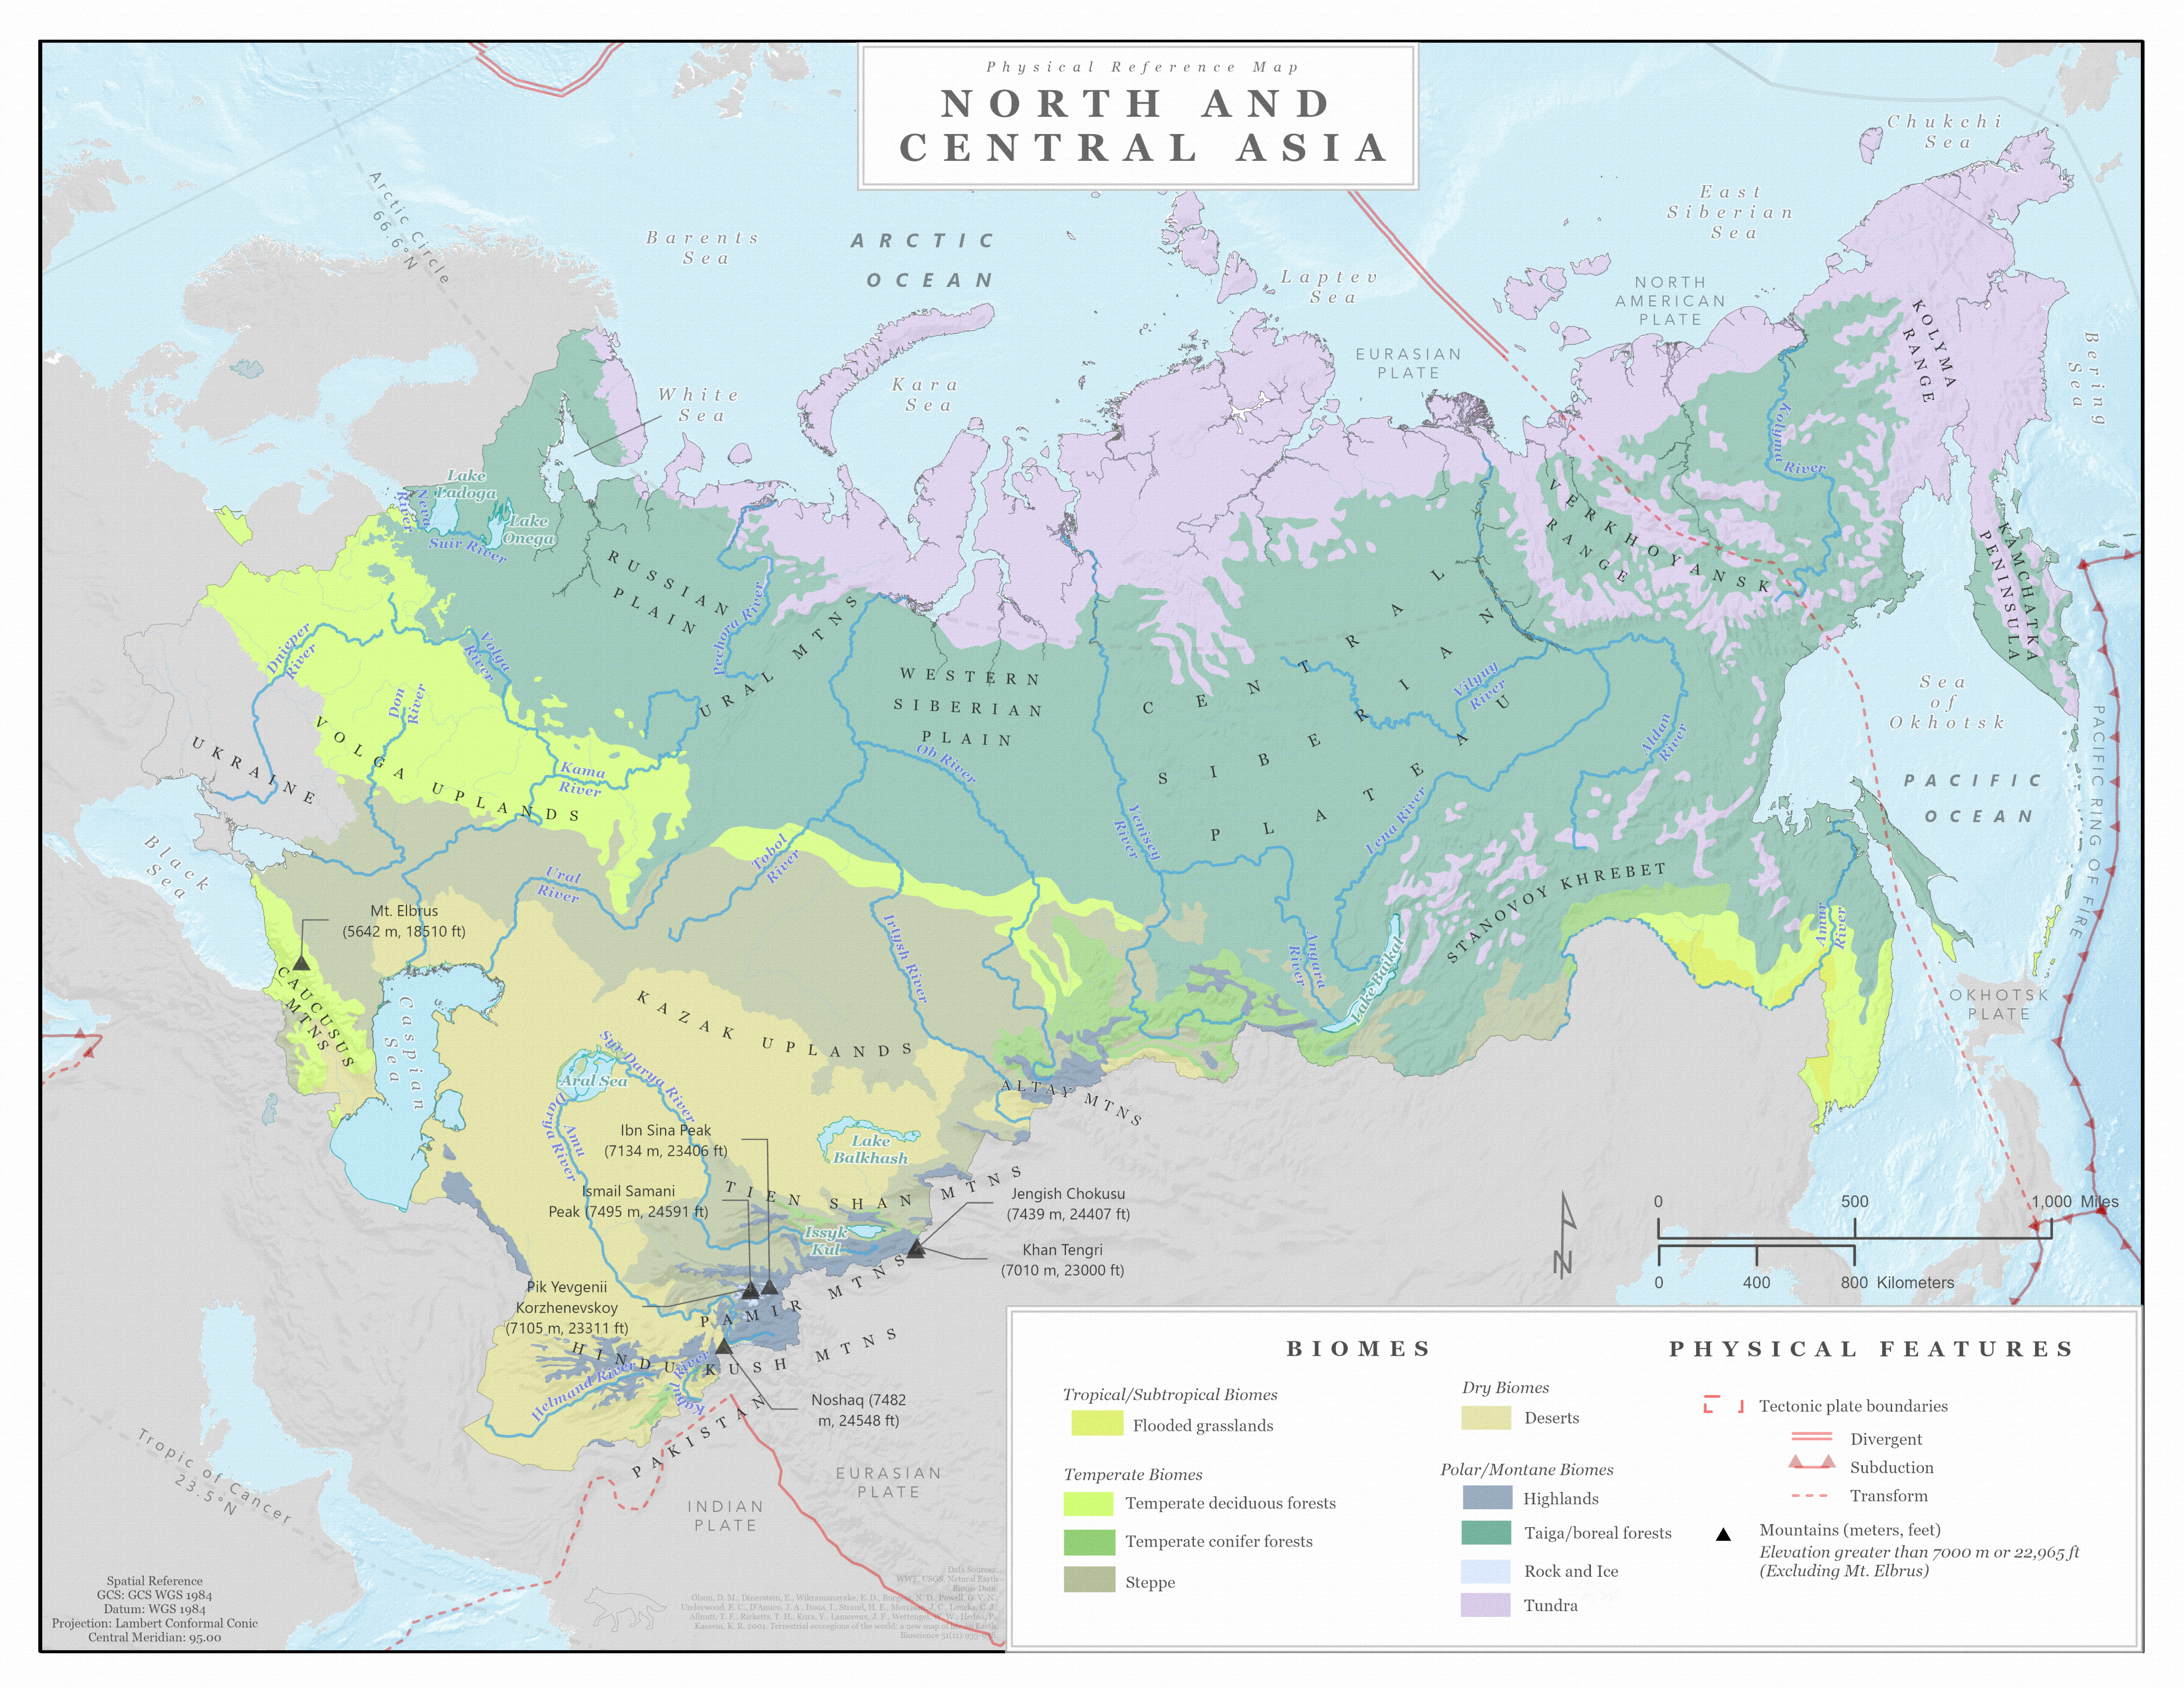 Biome and physical features map of North and Central Asia